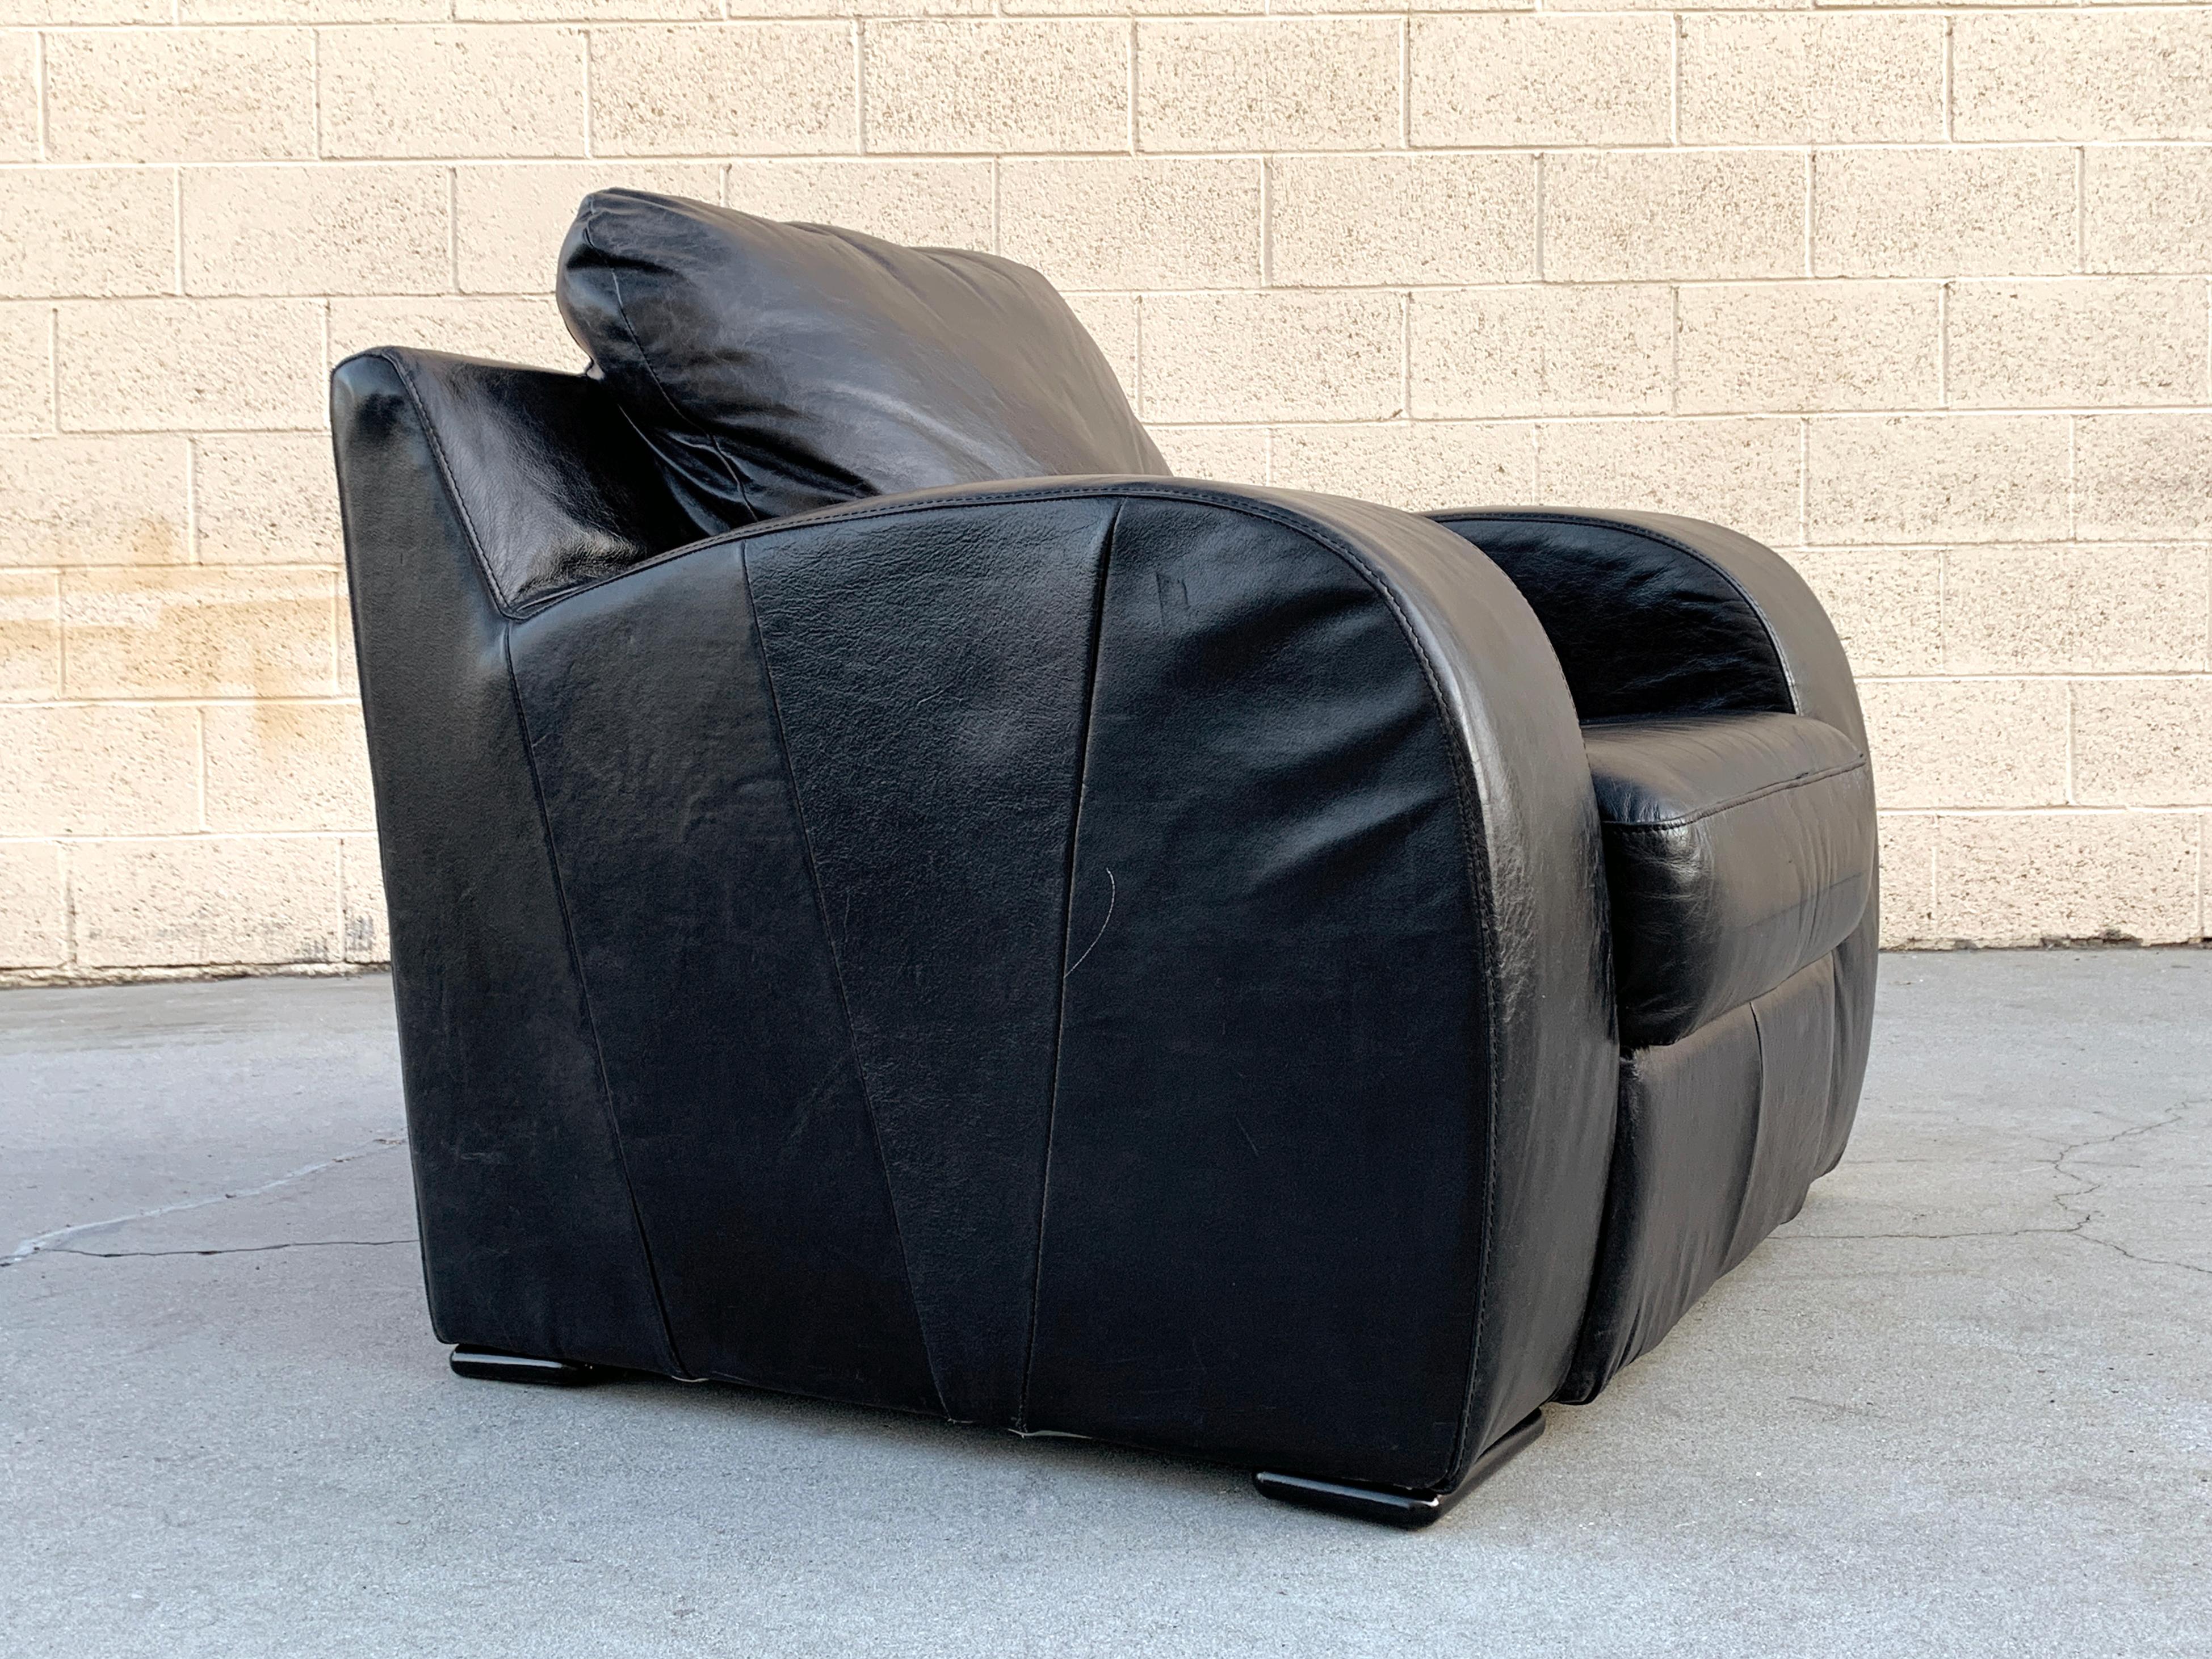 Art Deco Revival leather club chair, circa 1980s. Oversized and extra plush seat with original supple black leather and wonderful streamline moderne styling. It's good looking and undeniably comfortable! Overall in good vintage condition; leather